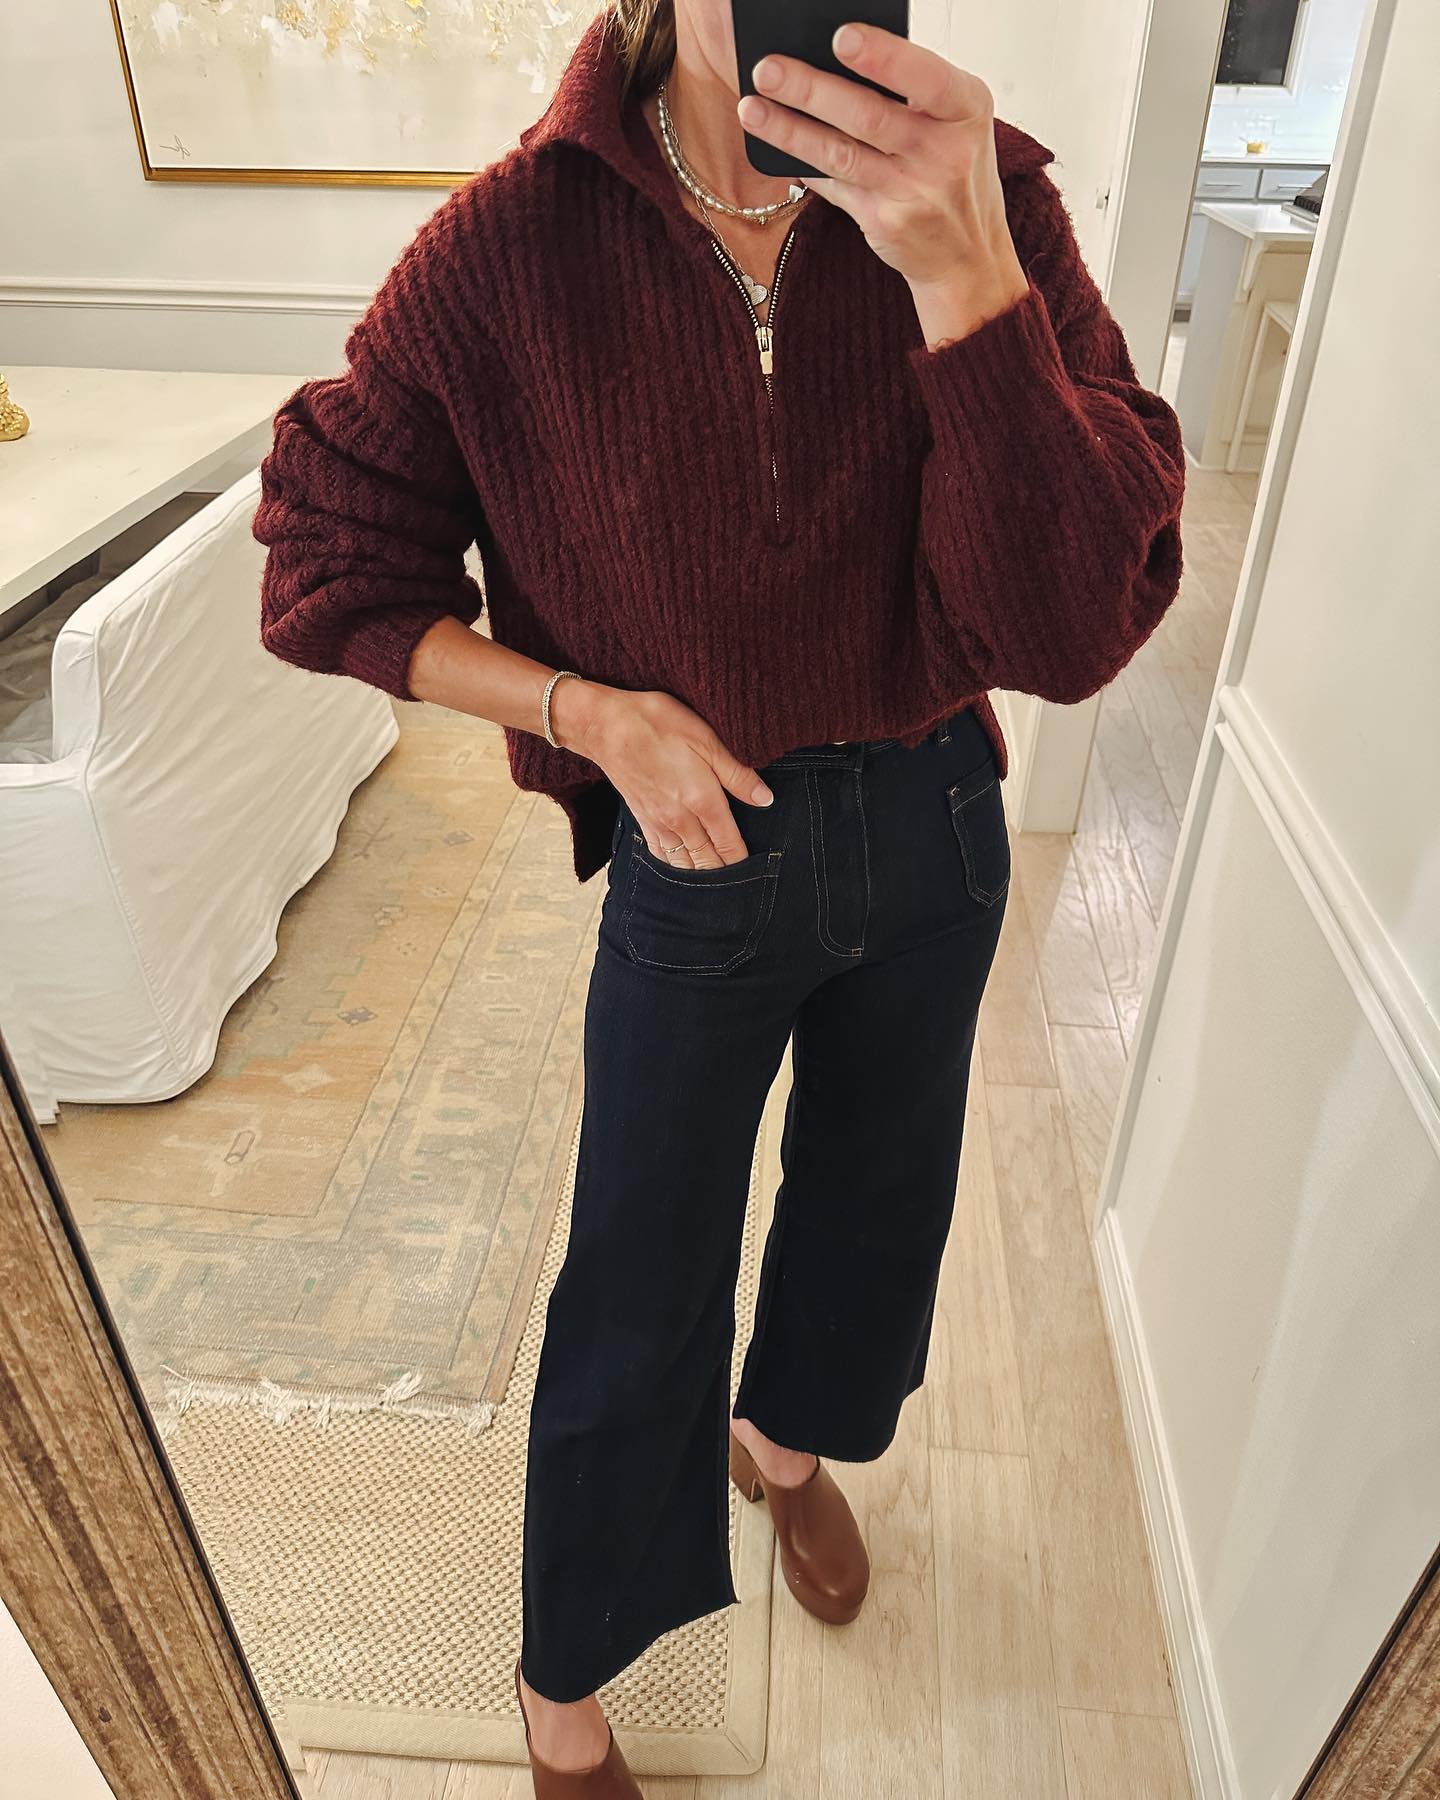 Boot cut Jeans with Sweater